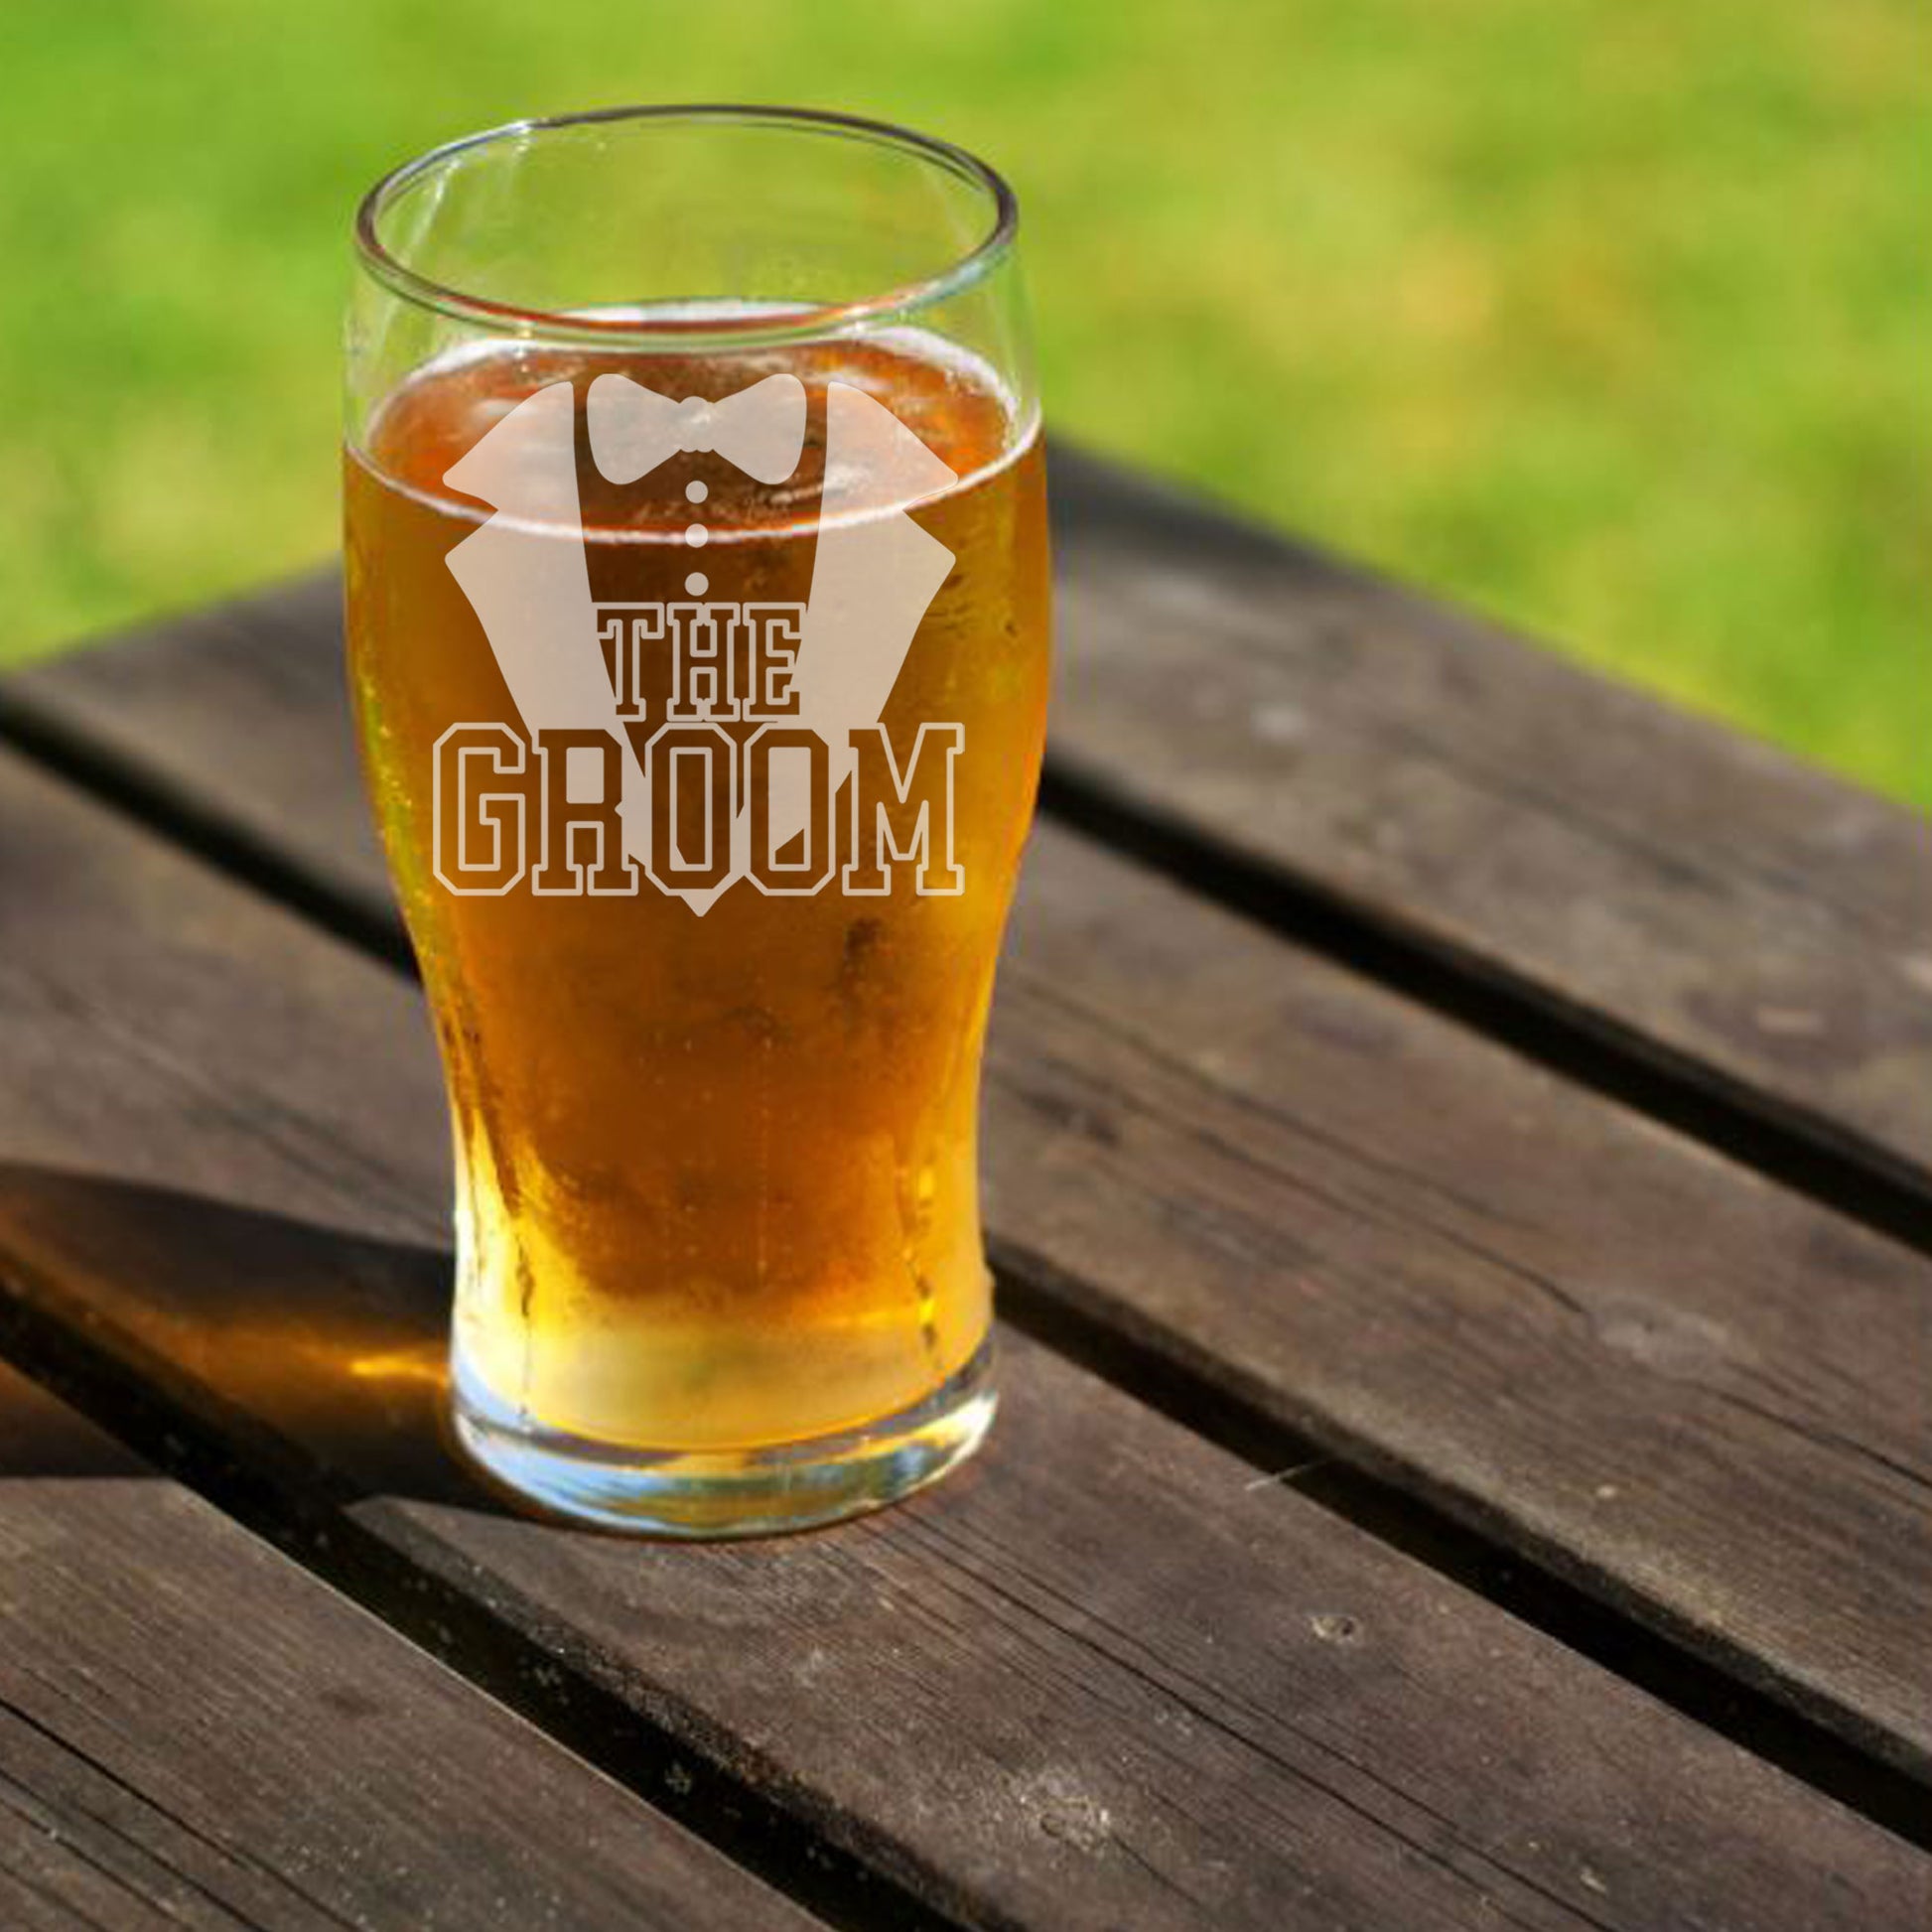 The Groom Engraved Beer Glass and/or Coaster Set  - Always Looking Good -   